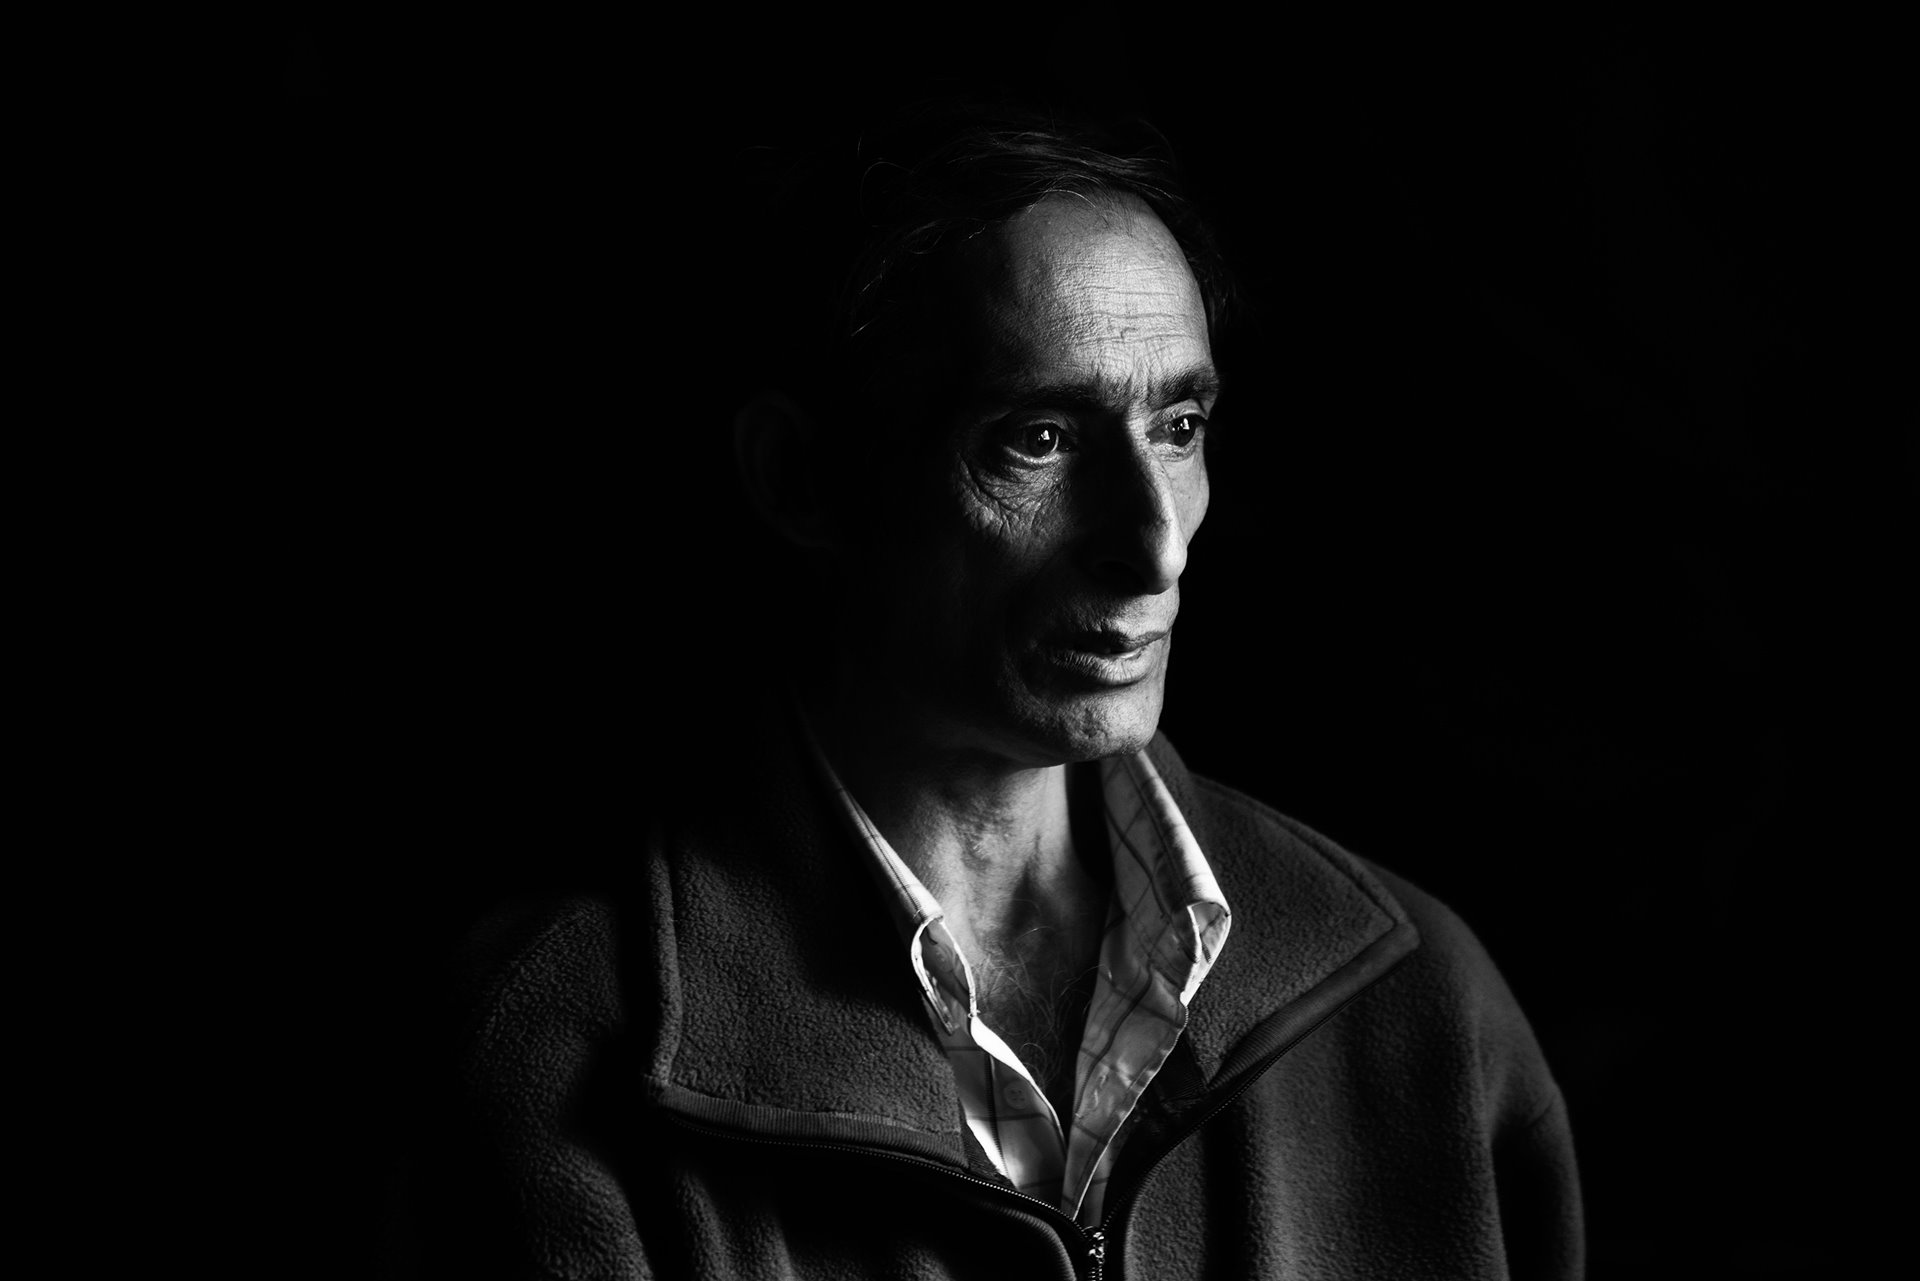 Enrique Navarreta lives 500 meters from a fracking tower in Allen, Río Negro, Argentina, and complains of constant noise from drilling and trucks, and artificial light 24 hours a day. Fracking in the area also causes water shortages and contamination, is associated with various health problems, and disturbs wildlife enough to cause behavioral change.